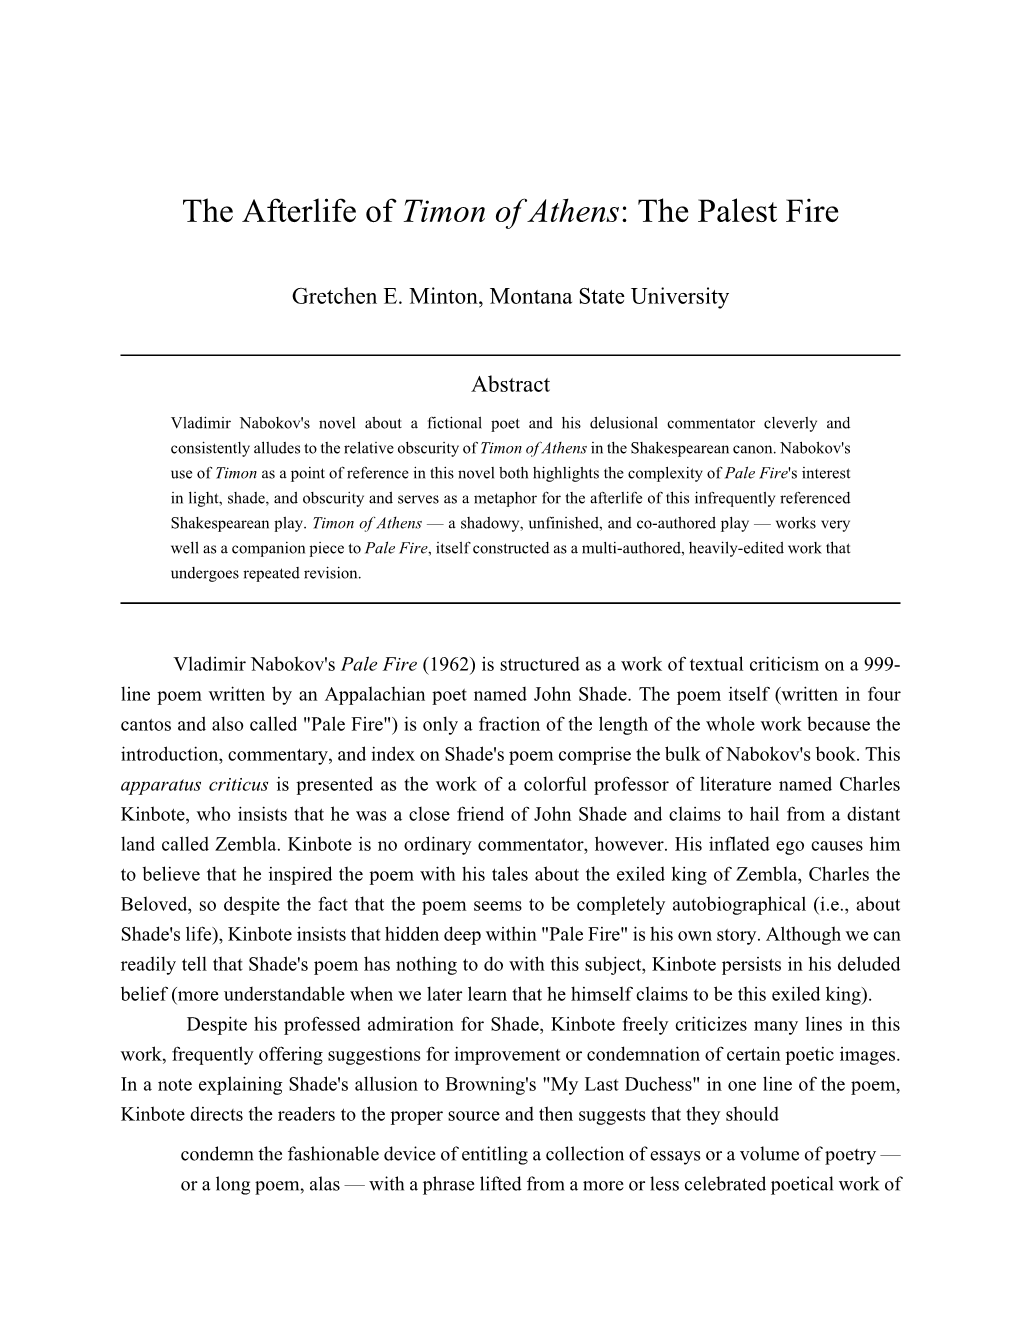 The Afterlife of Timon of Athens: the Palest Fire